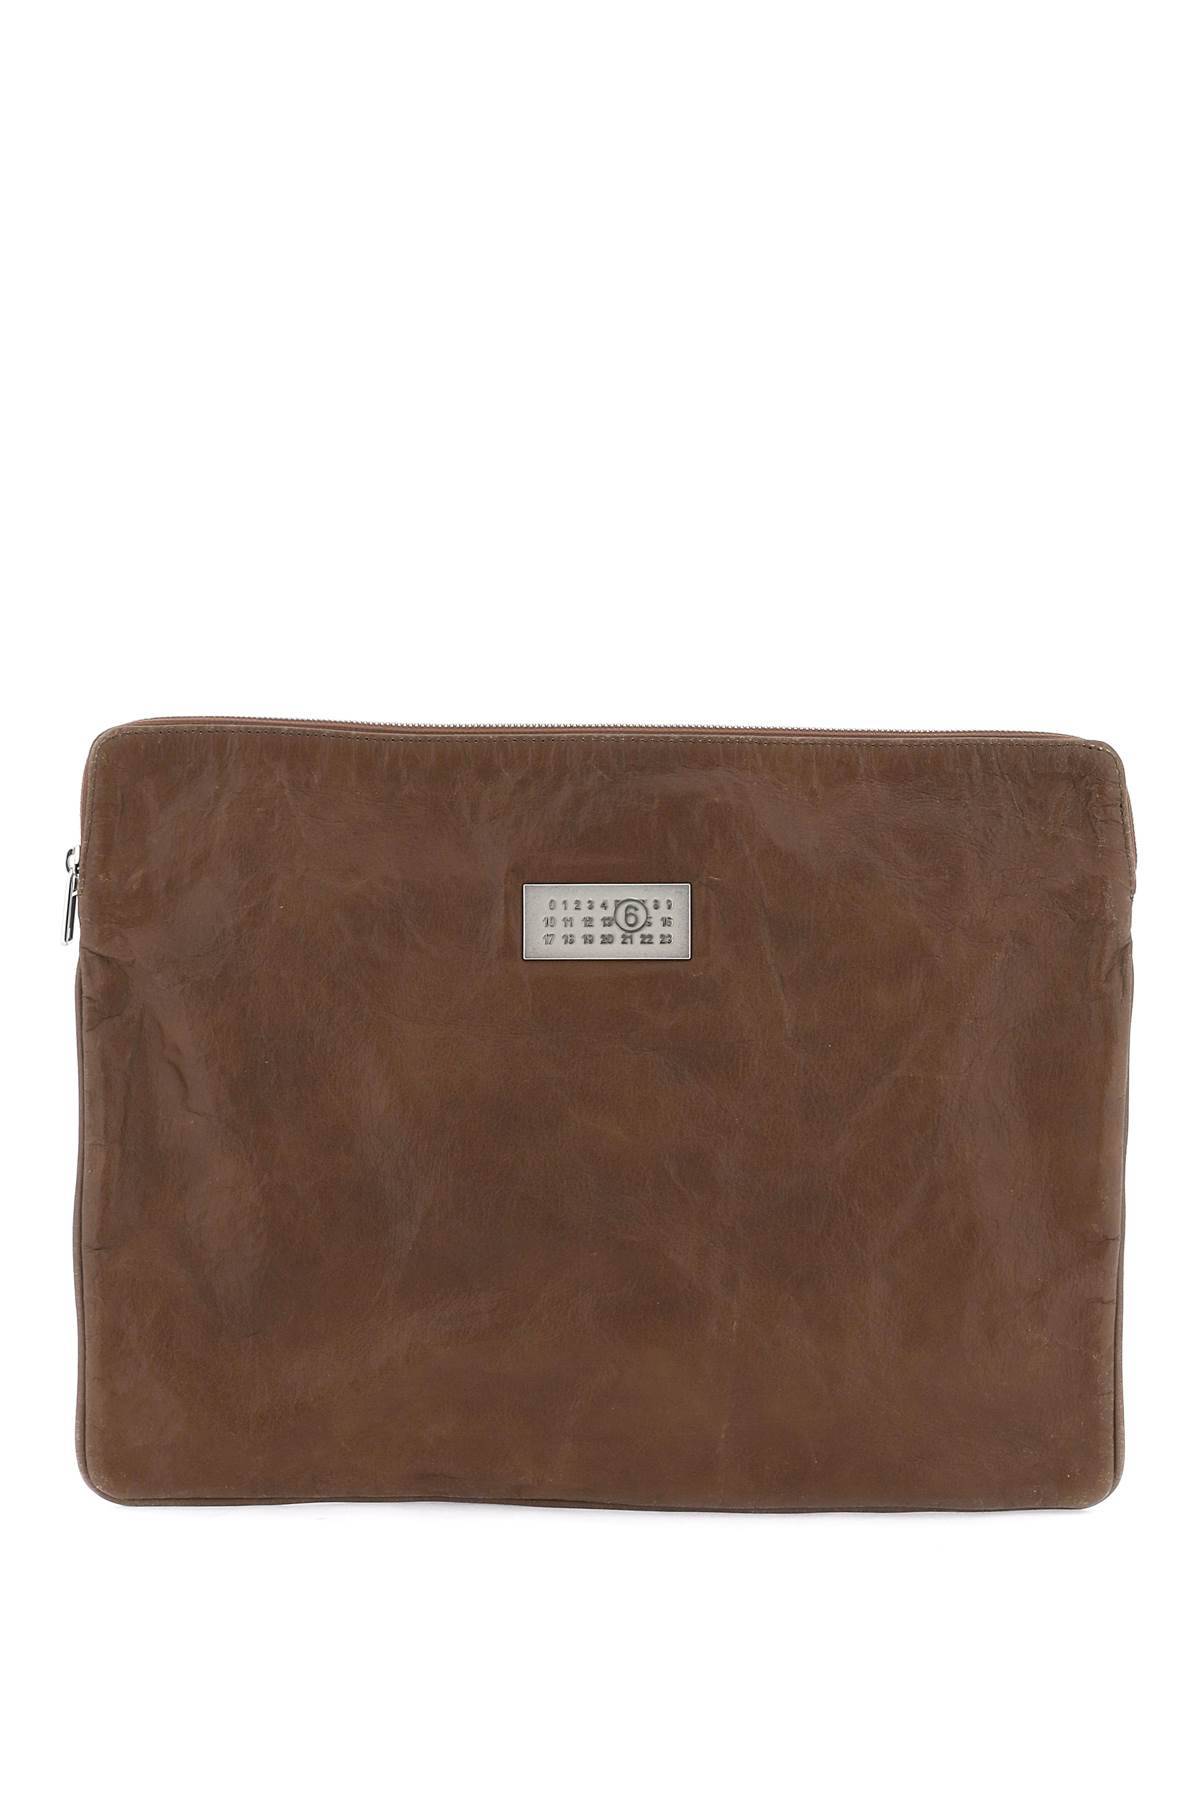 Mm6 Maison Margiela Crinkled Leather Document Holder Pouch In Brown